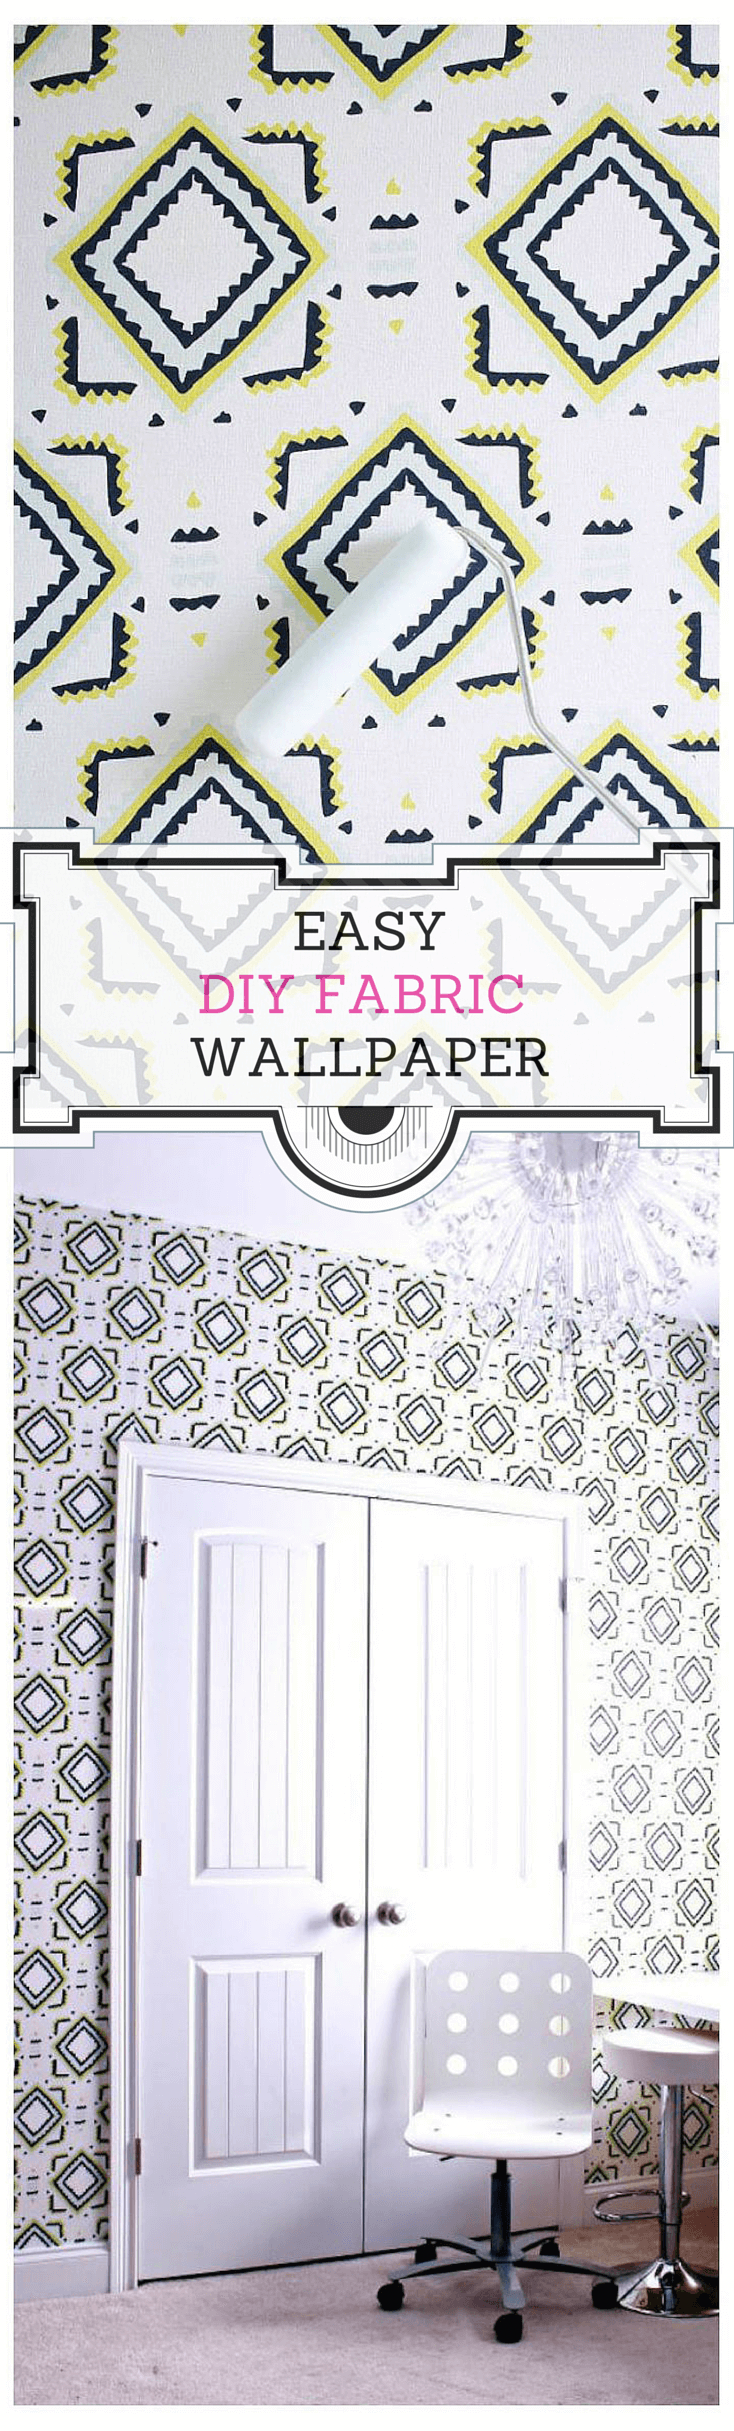 how to wallpaper a room with fabric